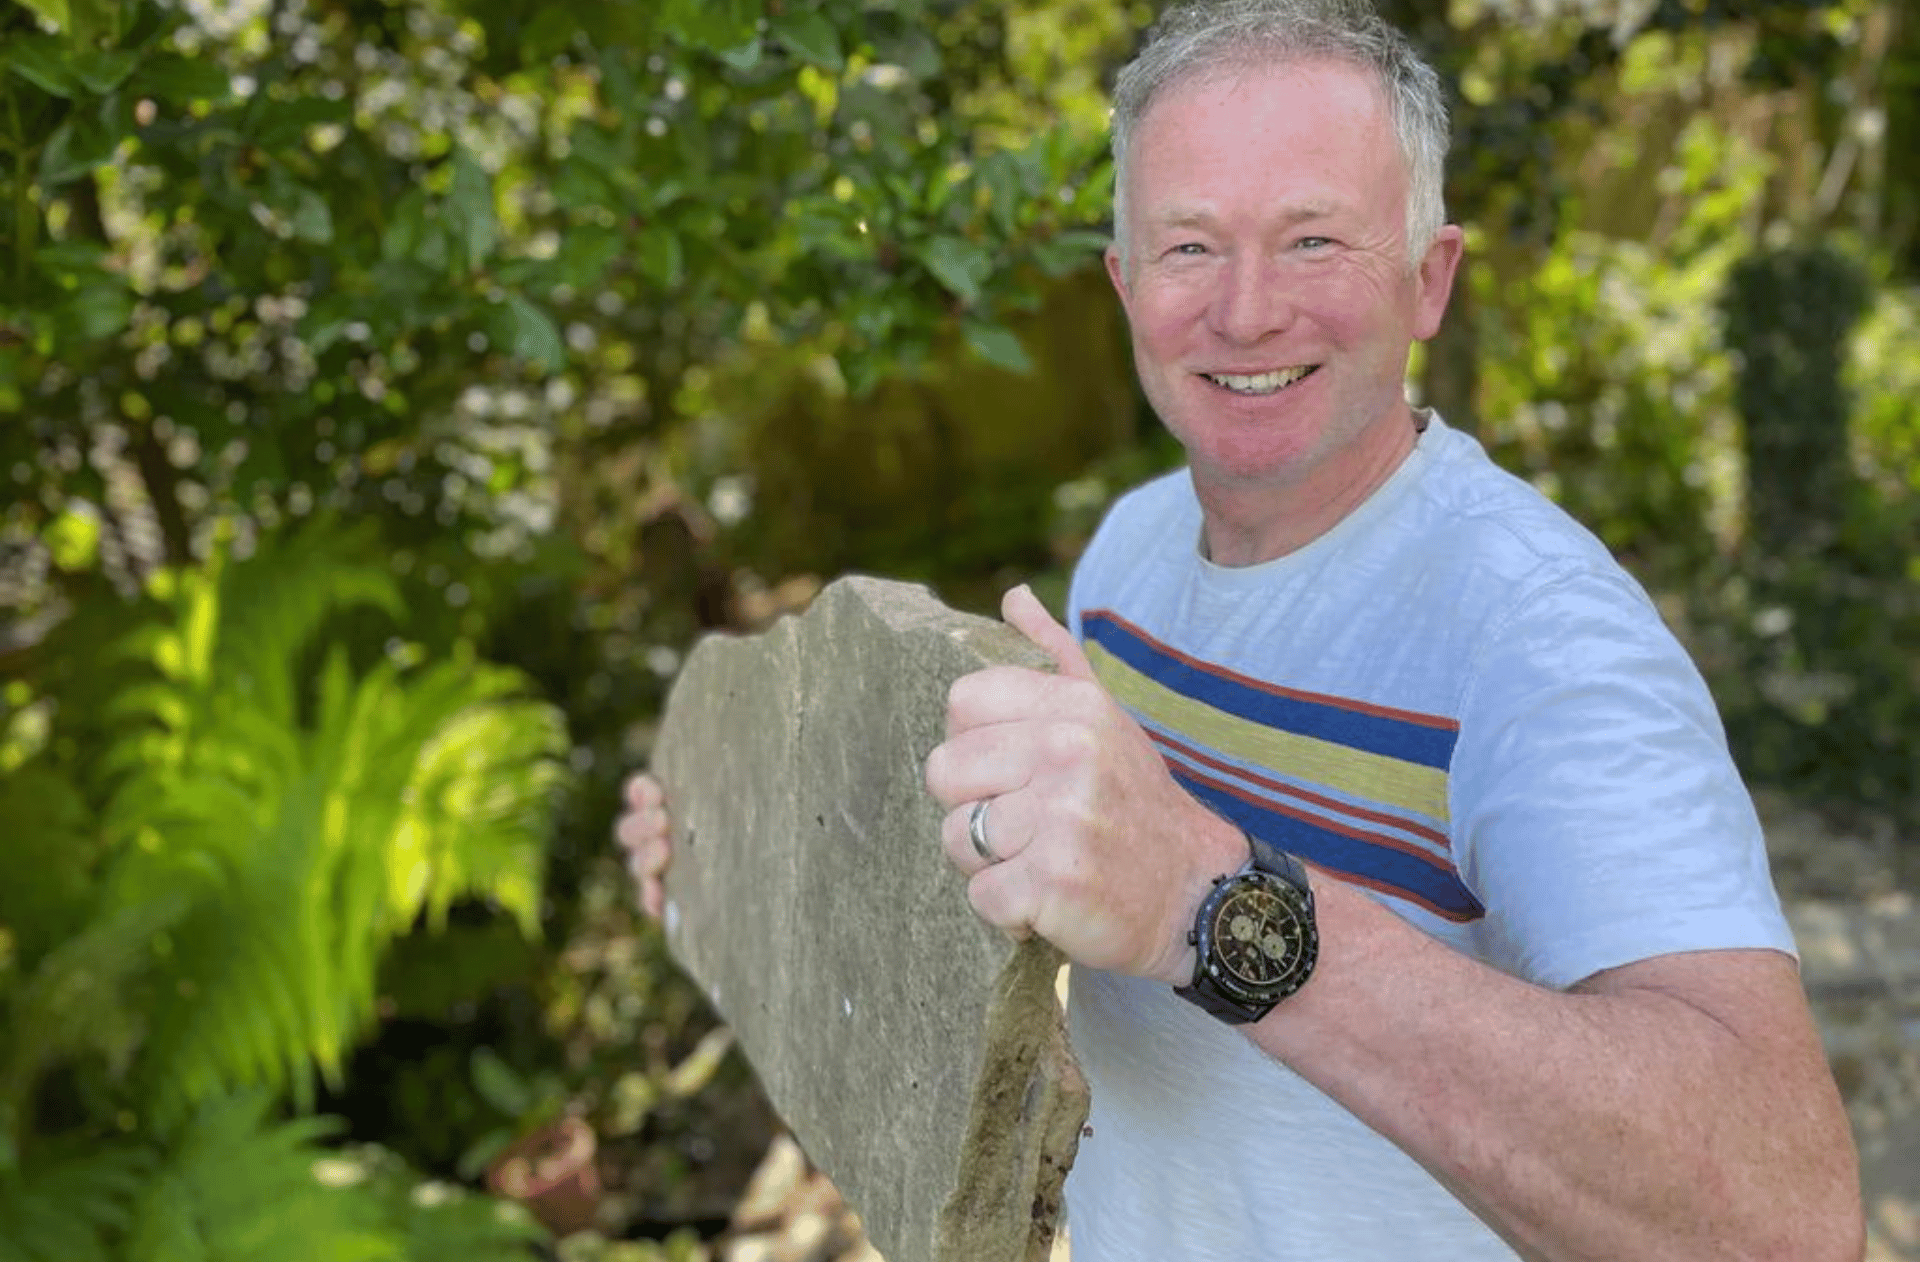 Gardening broadcaster, Toby Buckland... peers into future of smartwatches and gardening tech: 